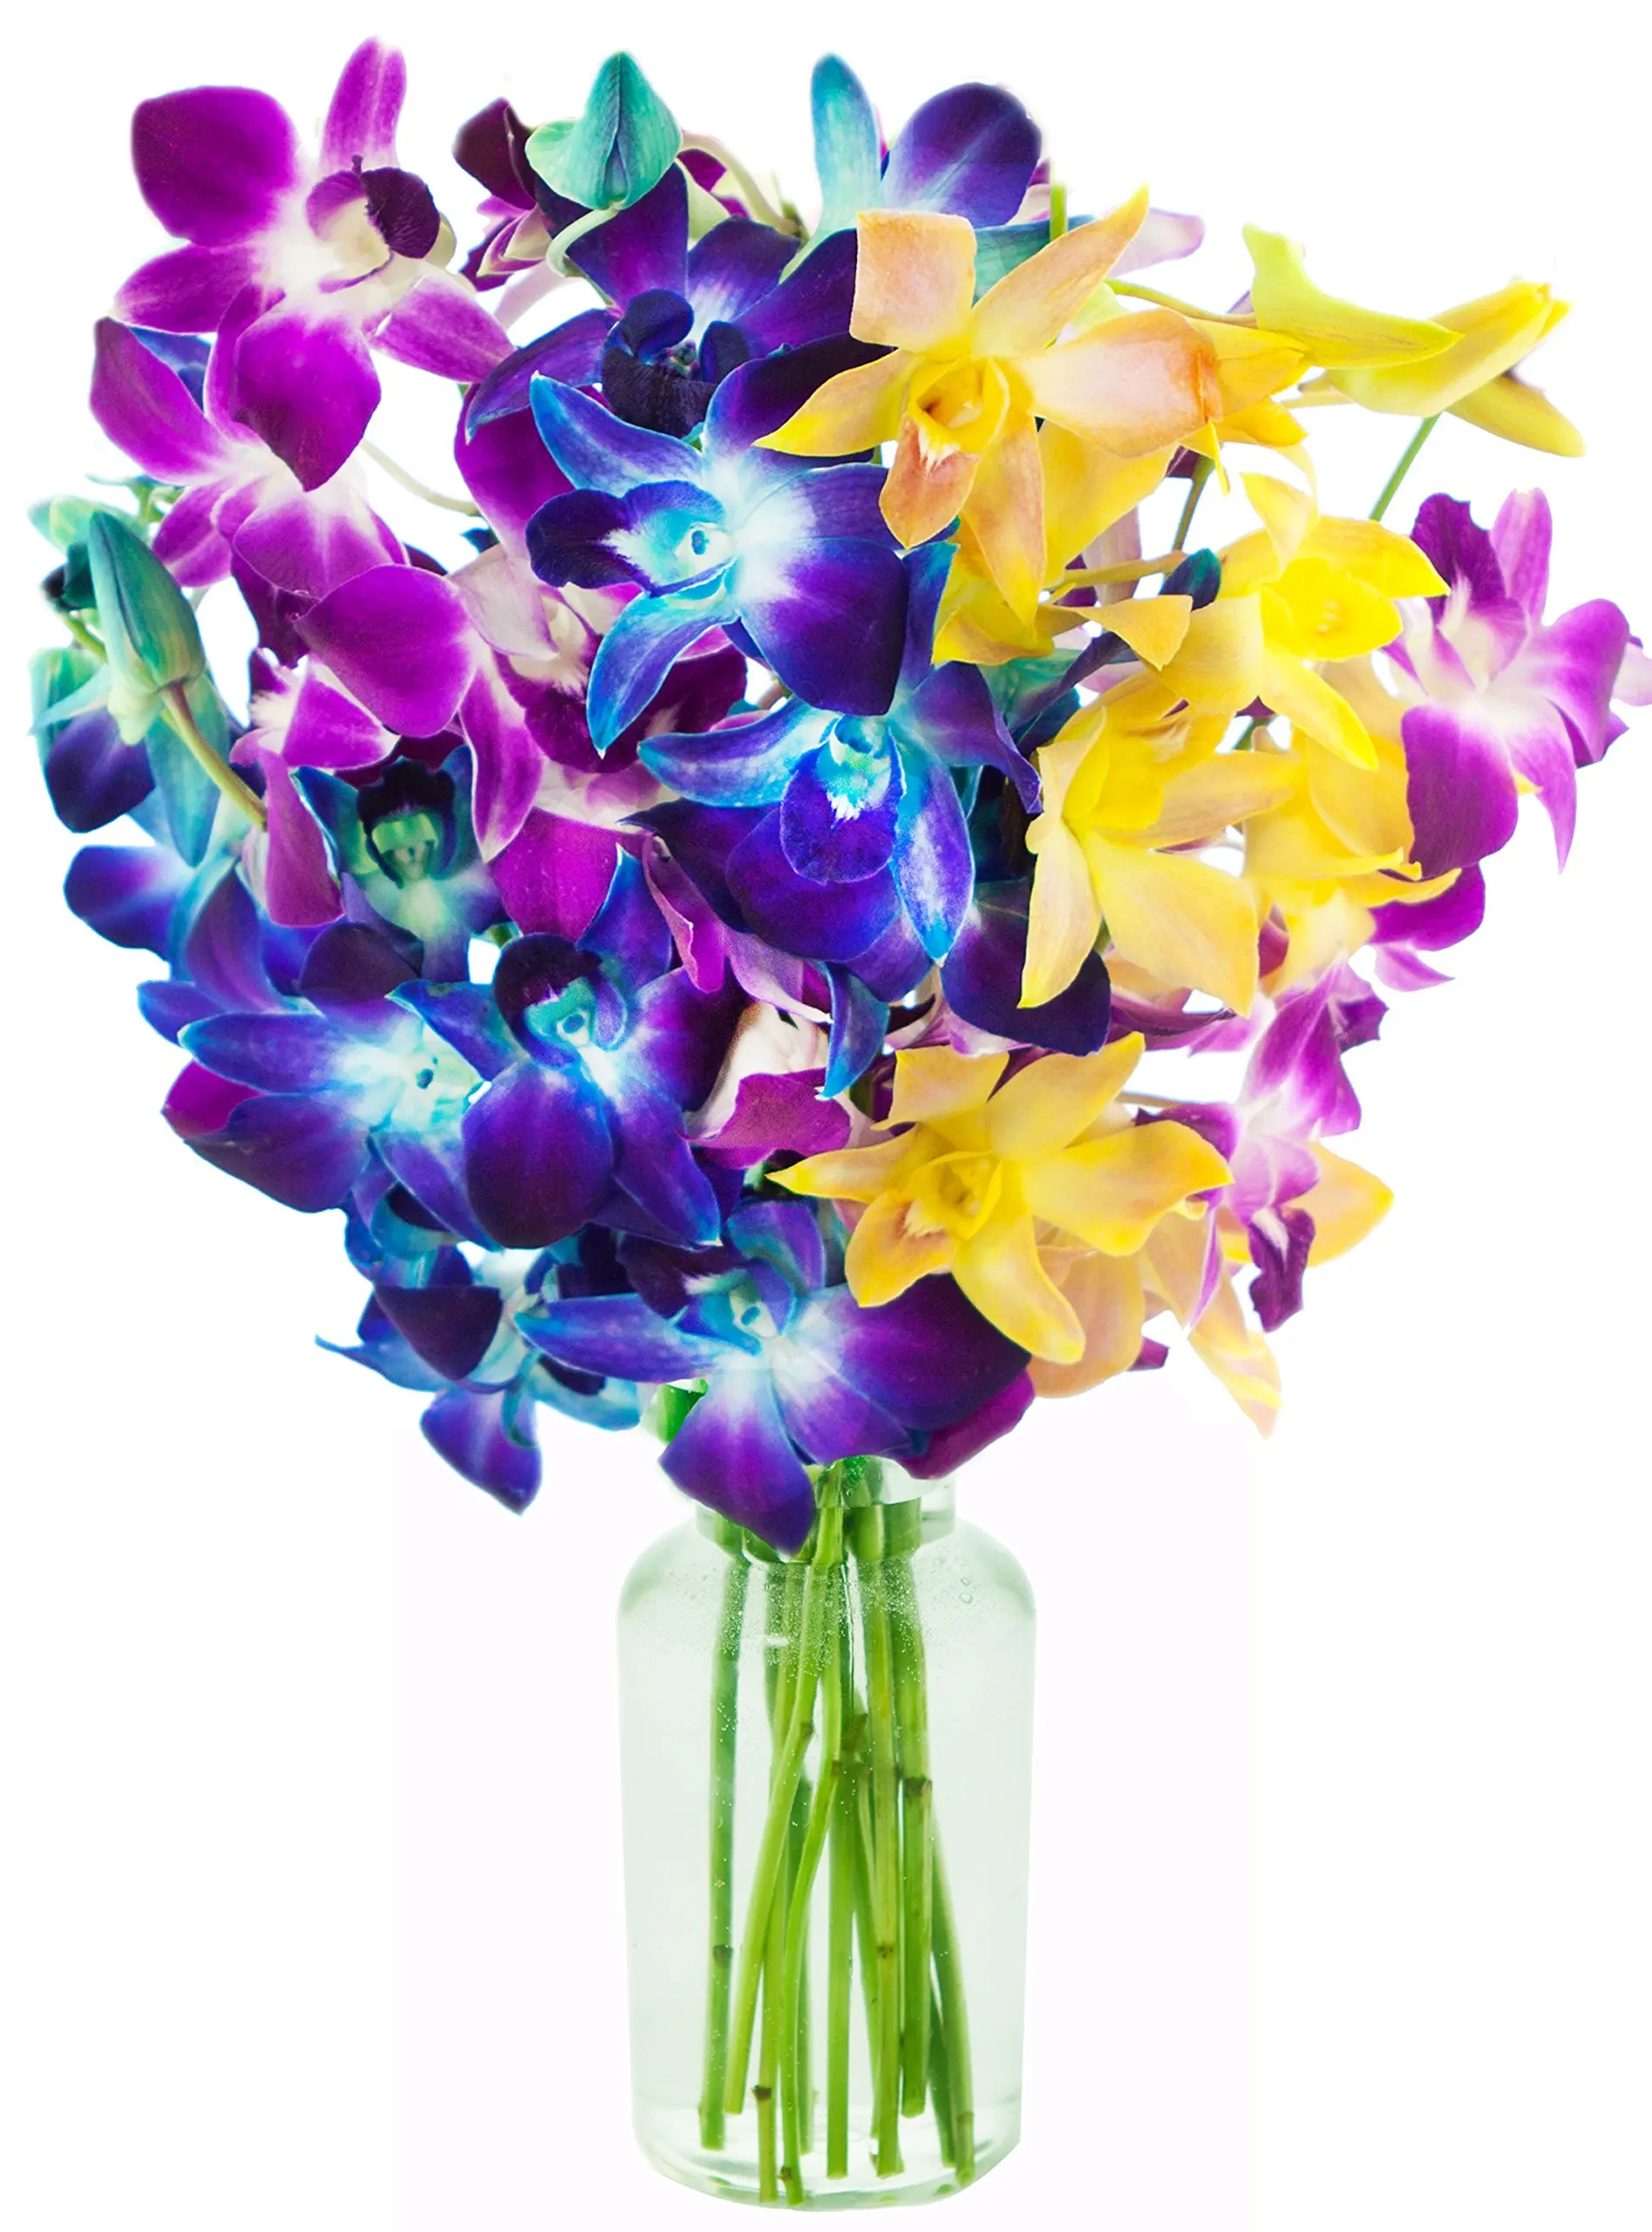 Buy Kabloom Exotic Rainbow Orchid Bouquet Of 5 Blue Dendrobium Orchids 3 Purple Dendrobium Orchids And 2 Yellow Dendrobium Orchids From Thailand With Vase In Cheap Price On M Alibaba Com